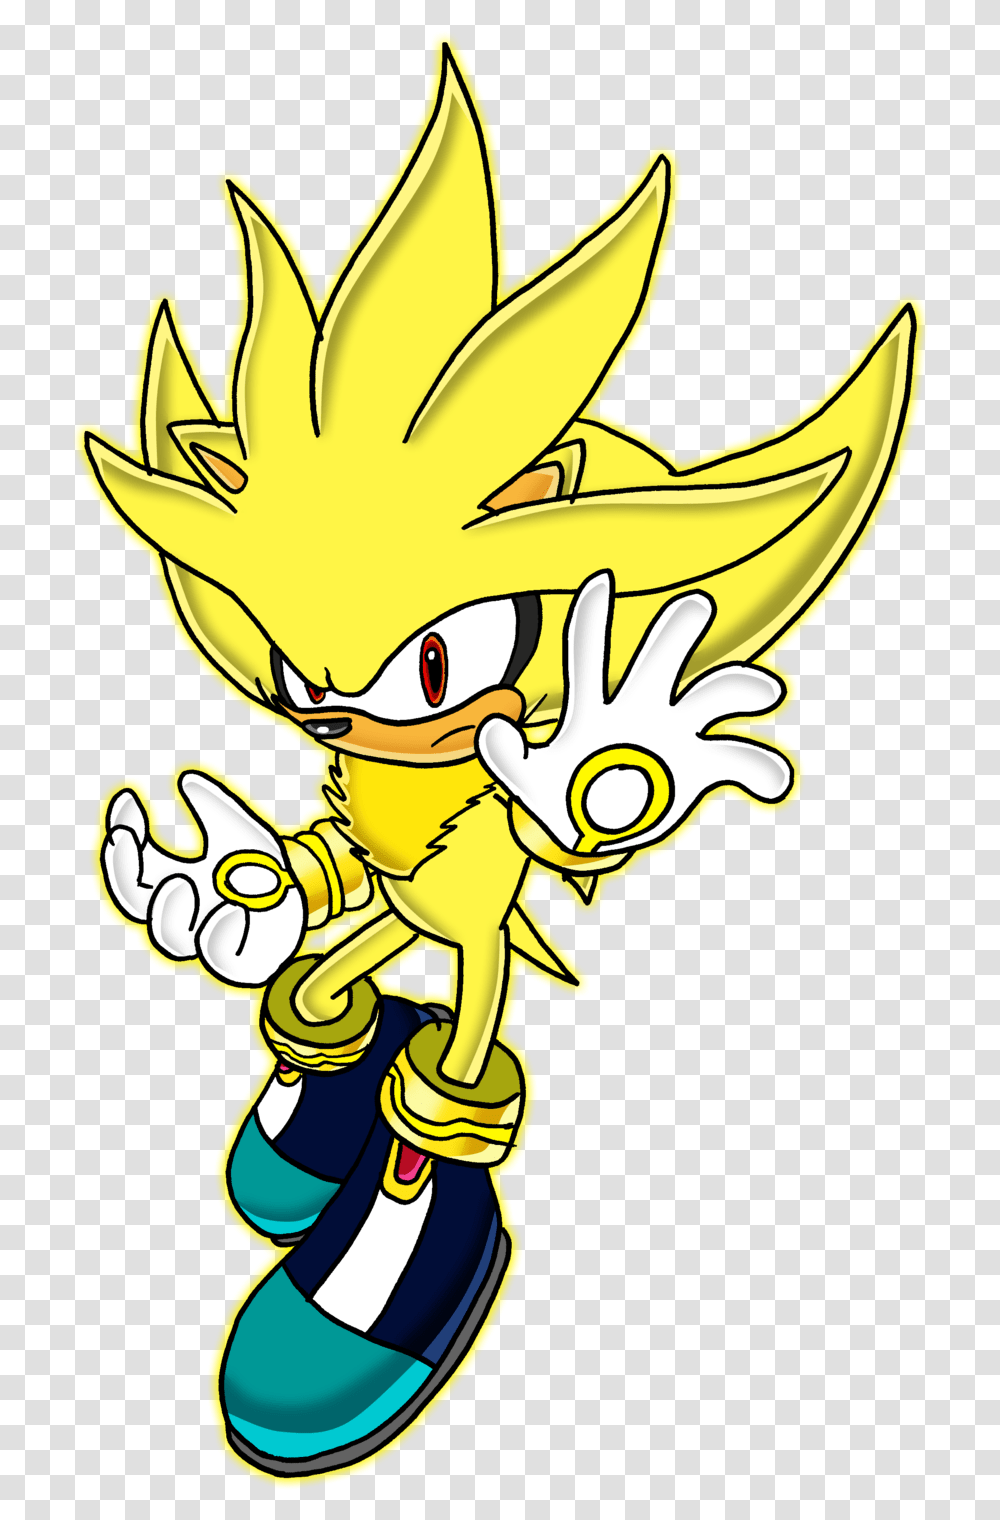 Silver The Hedgehog Images Super Silver Drawing Hd Silver The Hedgehog Cartoon, Light, Wasp, Andrena Transparent Png